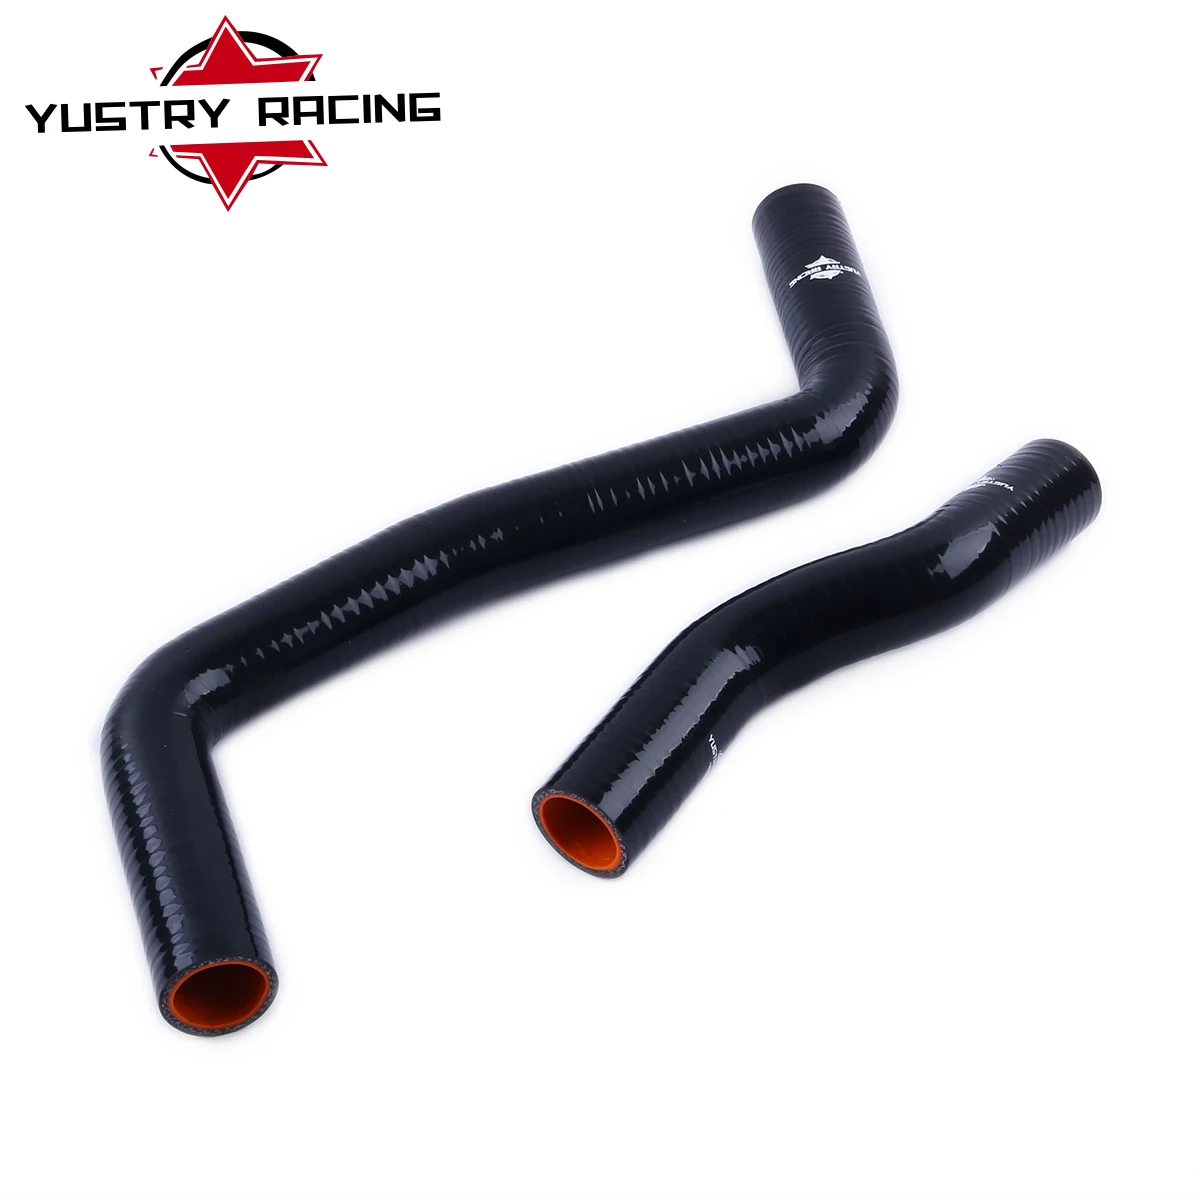 

Silicone Radiator Hose Kit for Toyota Corolla Levin AE111 AE101G 4A-GE 20V 1995-2000 1996 1997 1998 1999